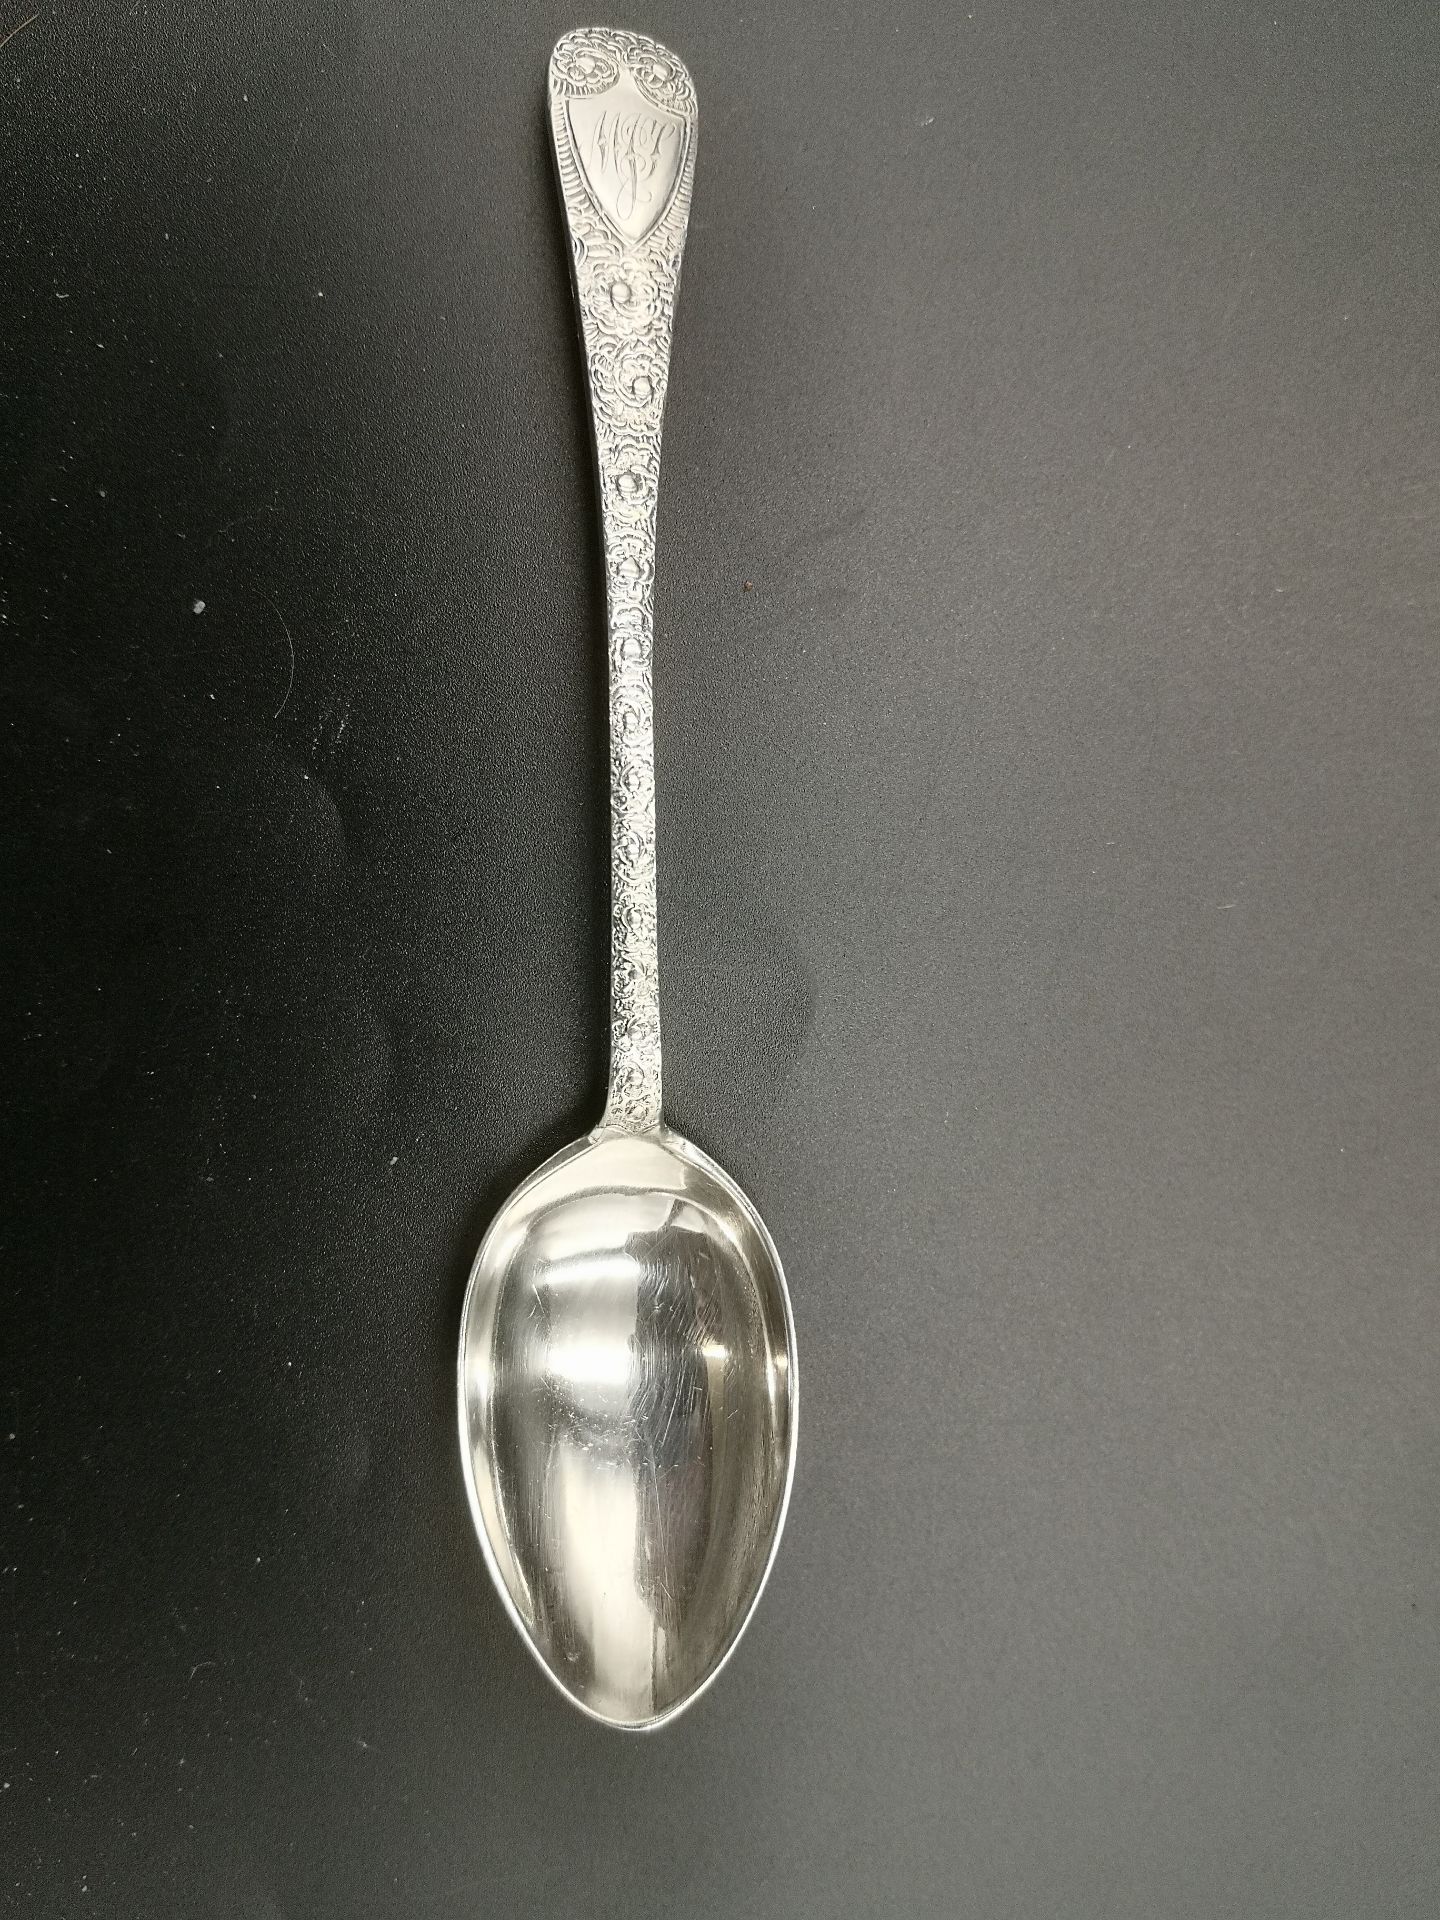 Ten Victorian silver spoons together with other silver spoons - Image 4 of 6